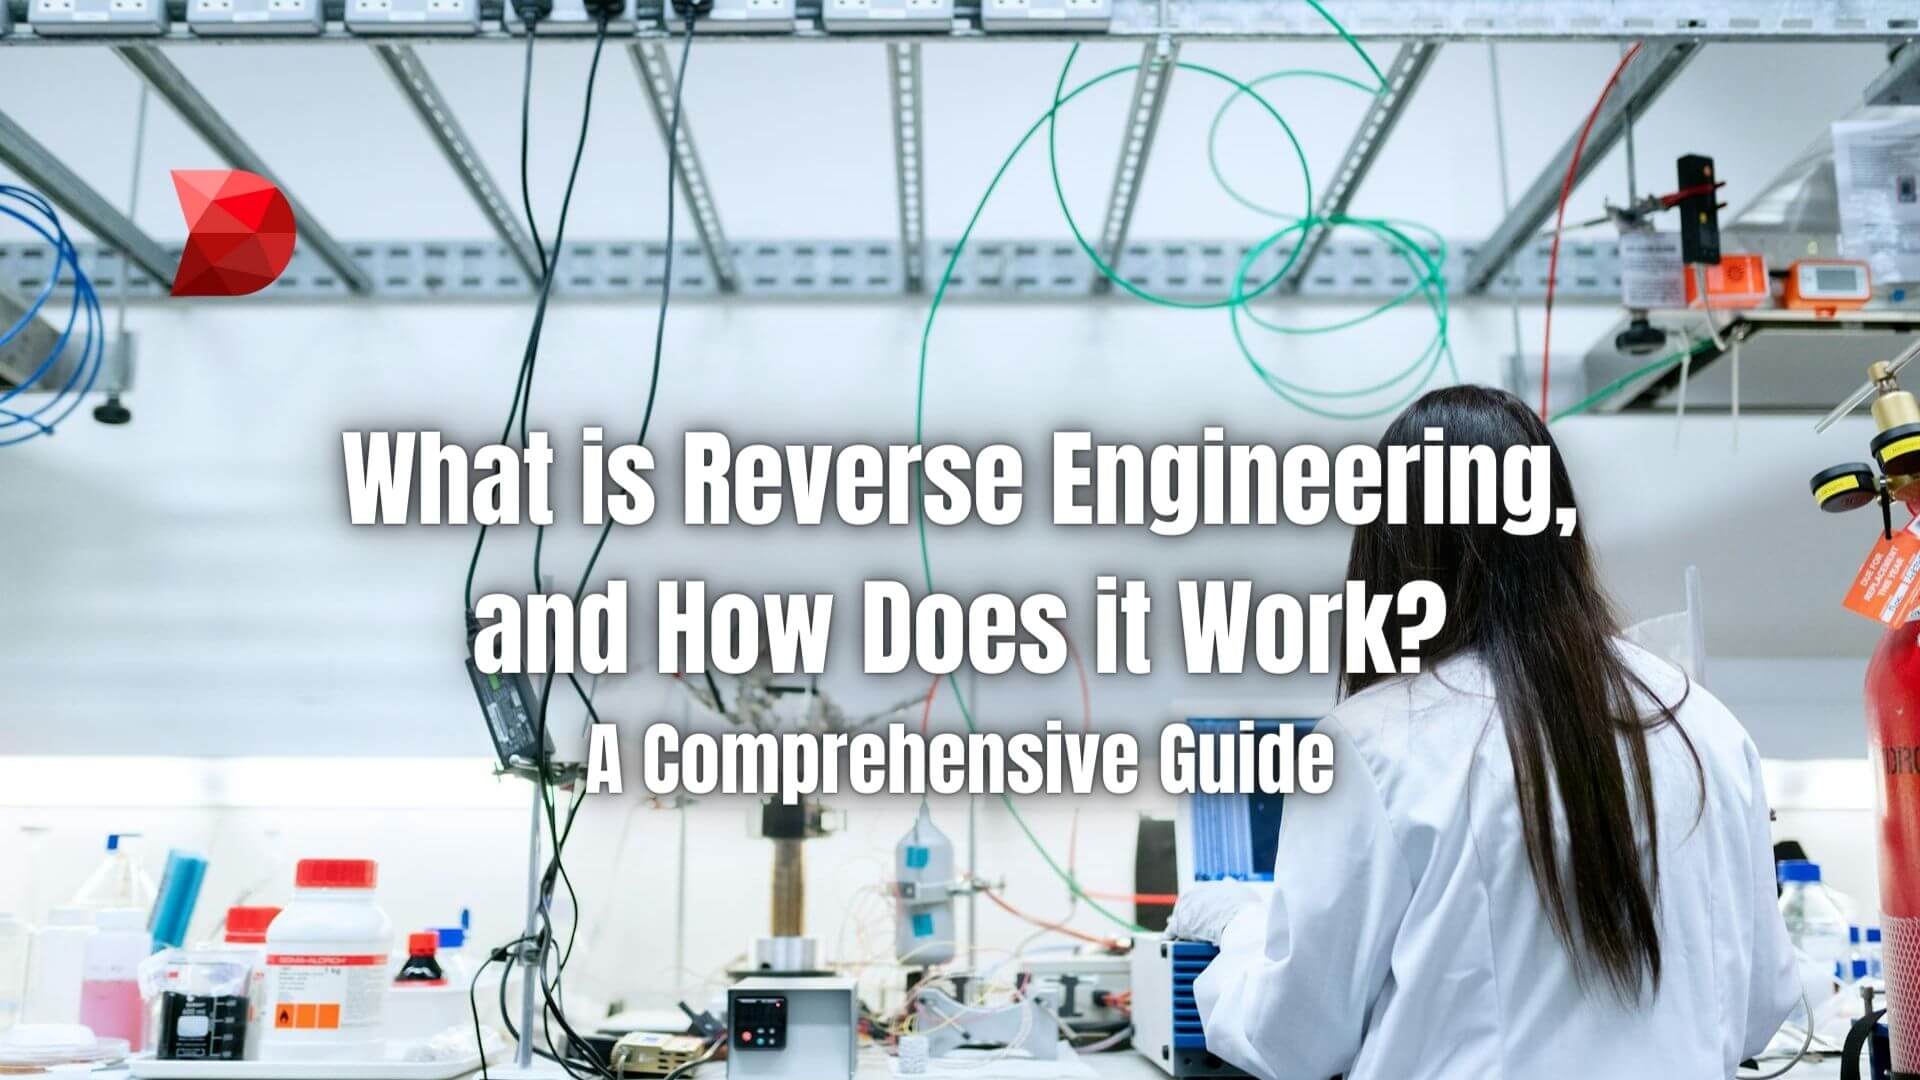 Unlock the secrets of reverse engineering with our comprehensive guide. Learn what it is and how it operates to empower your projects.